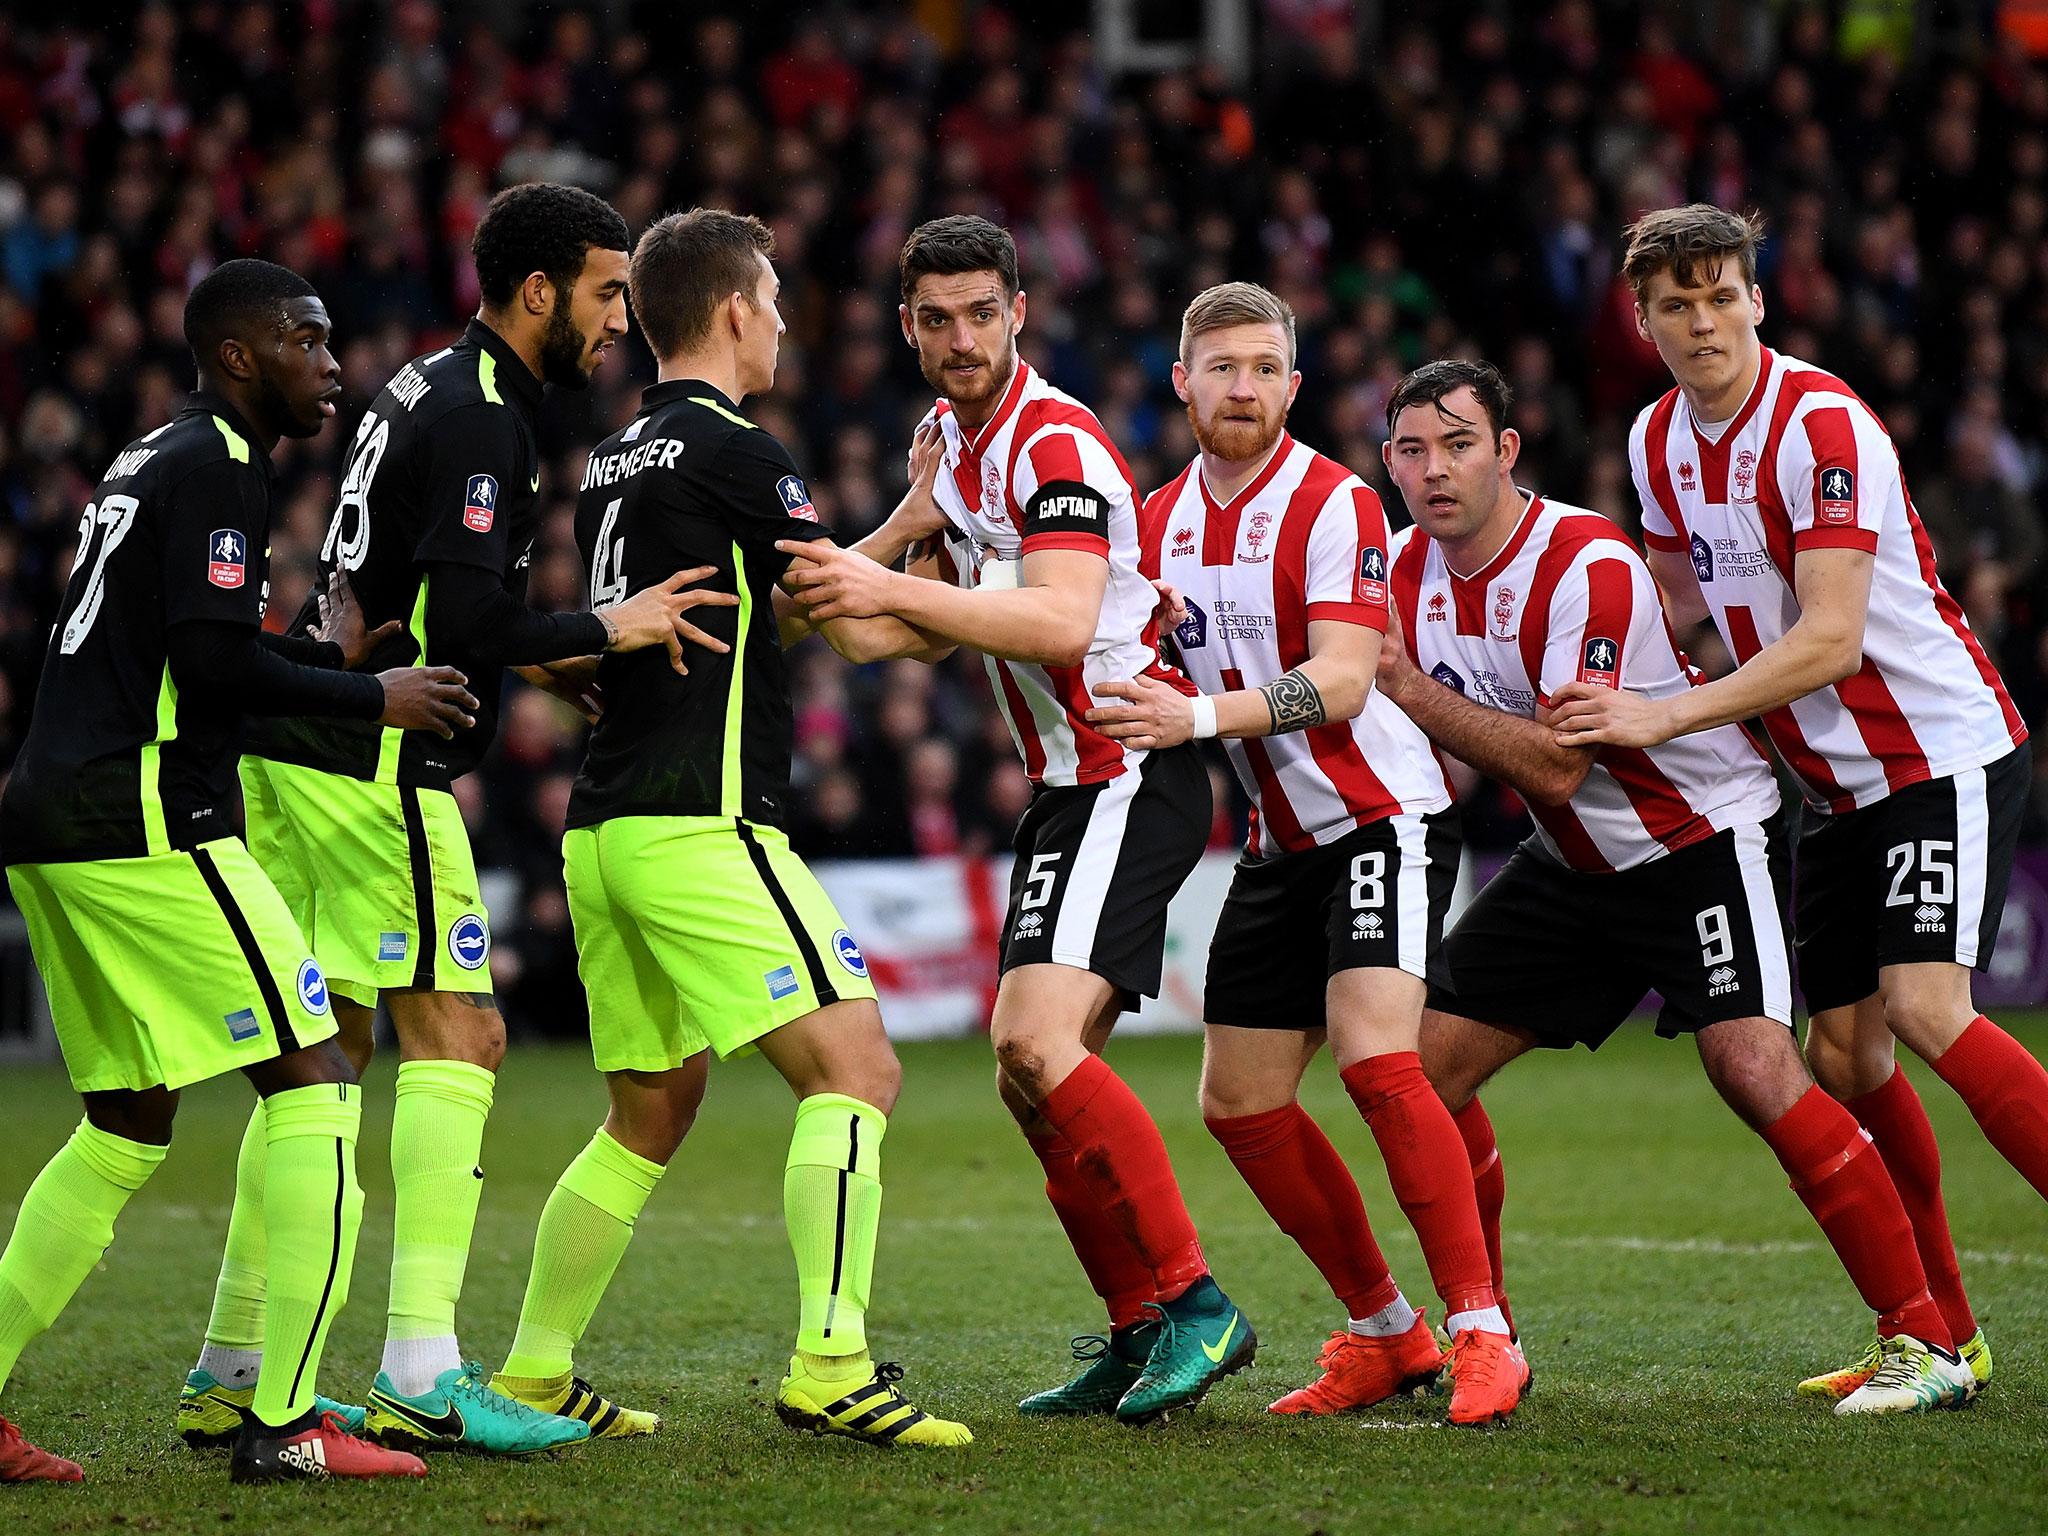 Video analysis is helping Lincoln's players to improve their performance in set-pieces